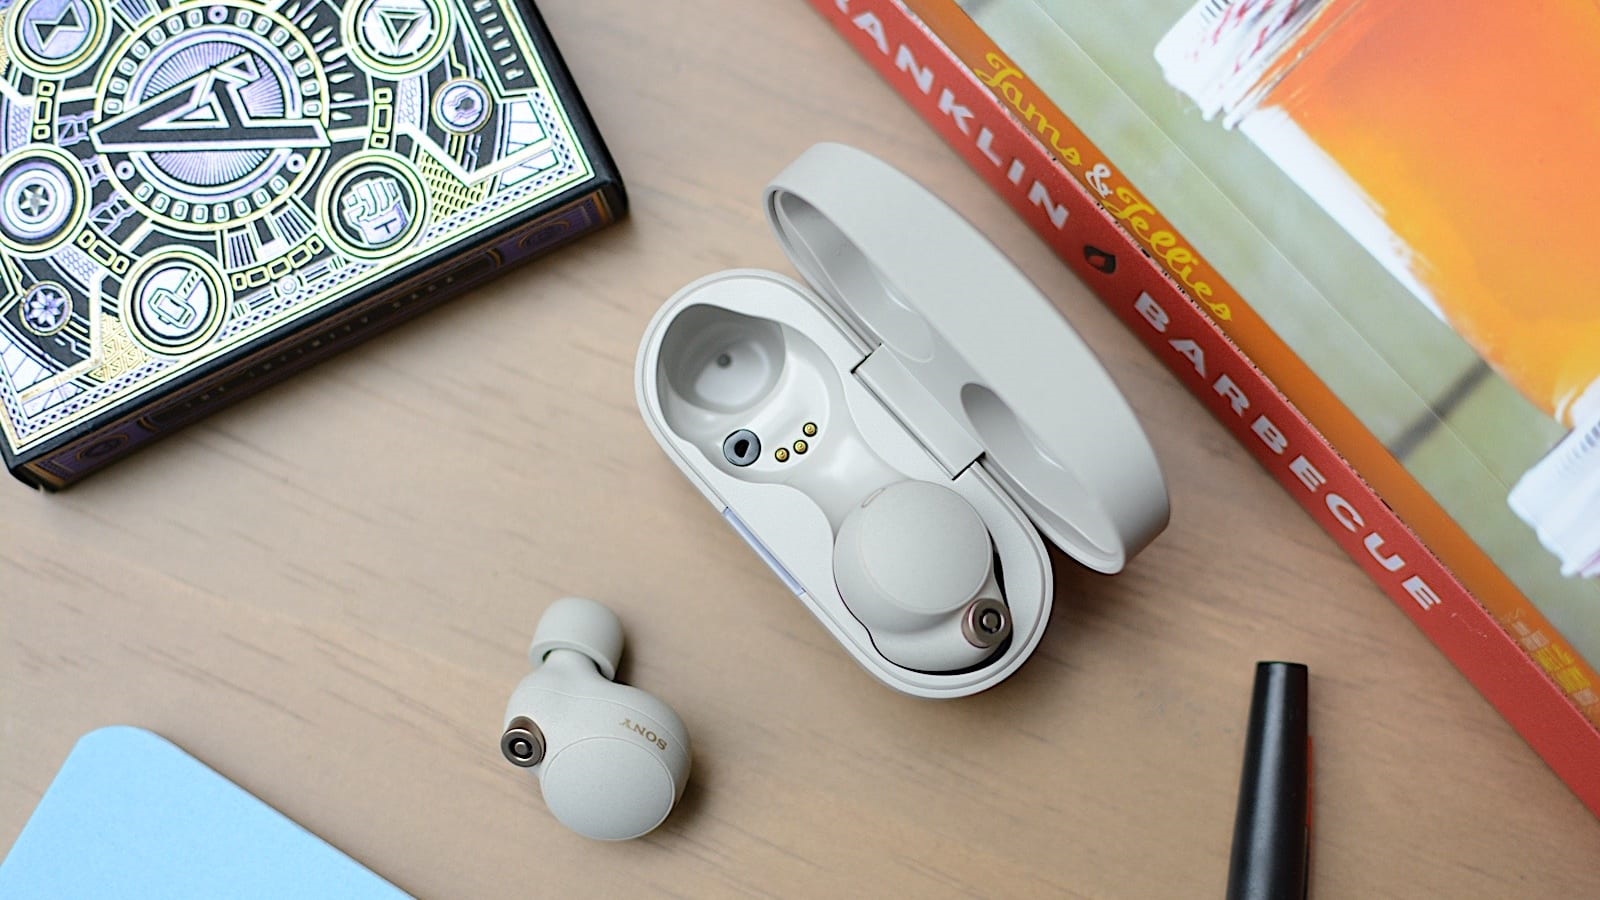 Apple’s second-generation AirPods Pro are back on sale for $200 | DeviceDaily.com